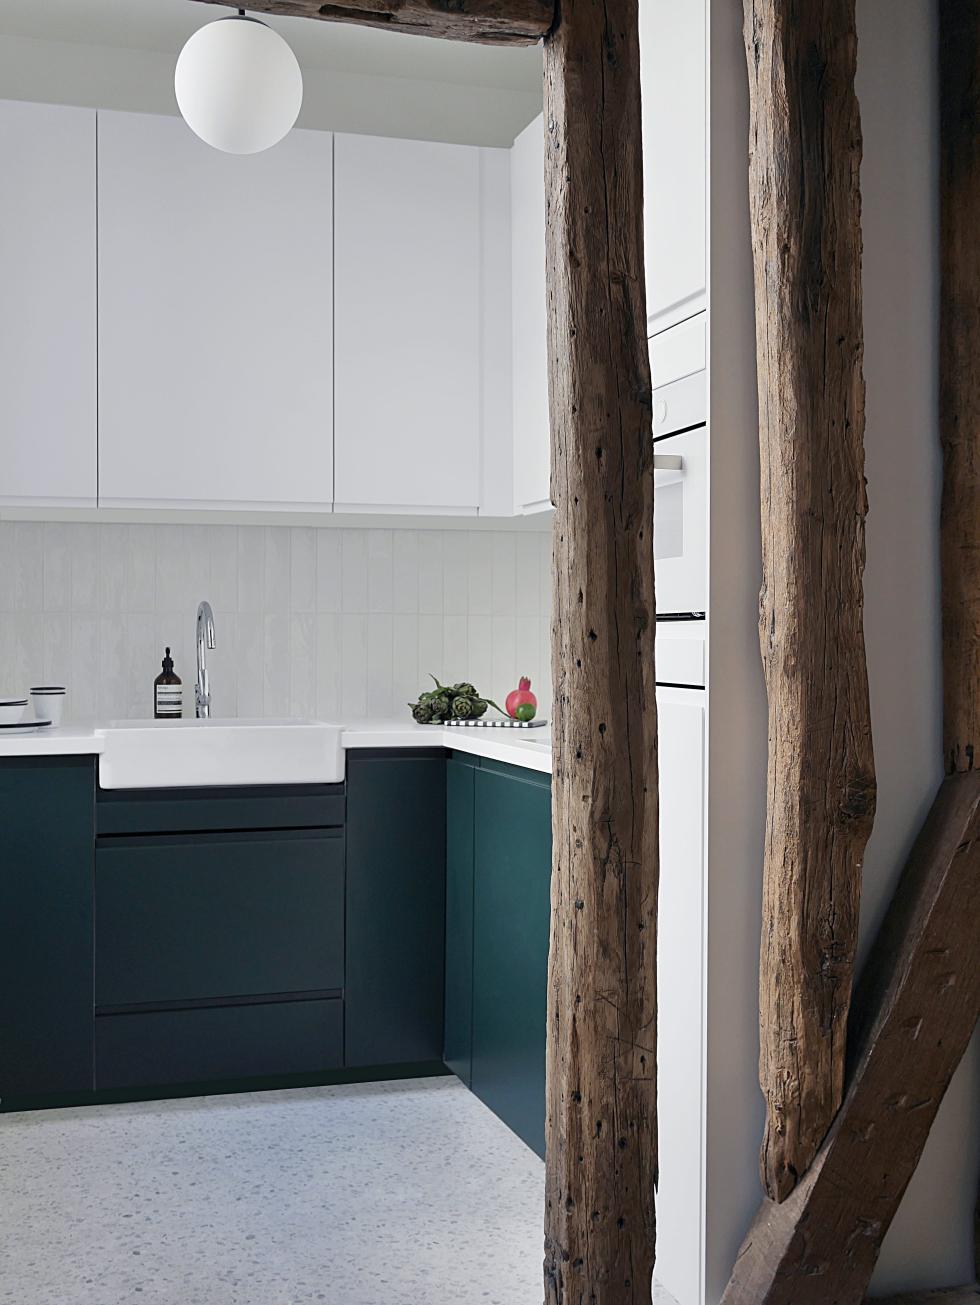 U SHAPE KITCHEN IN GREEN 02 - SOMBRE FOREST